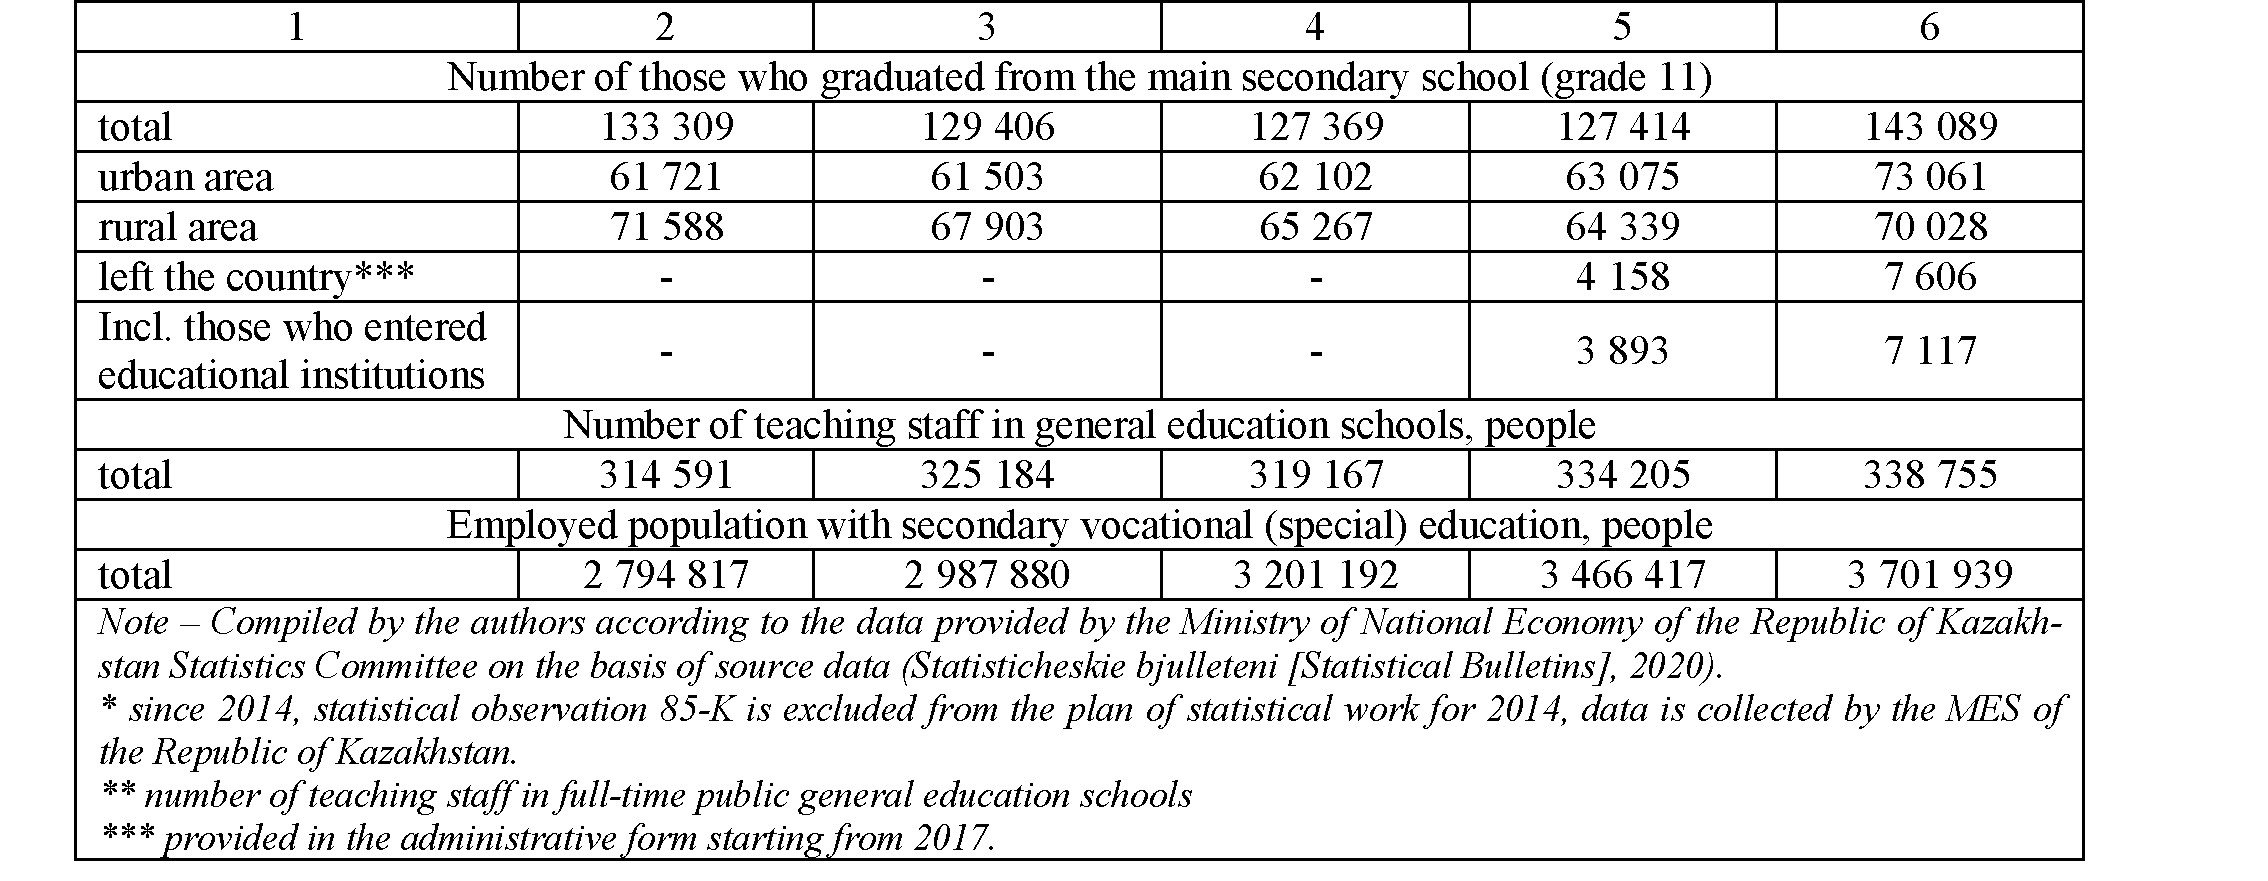 Development of education in the context of state management of the quality of life of the population in the Republic of Kazakhstan